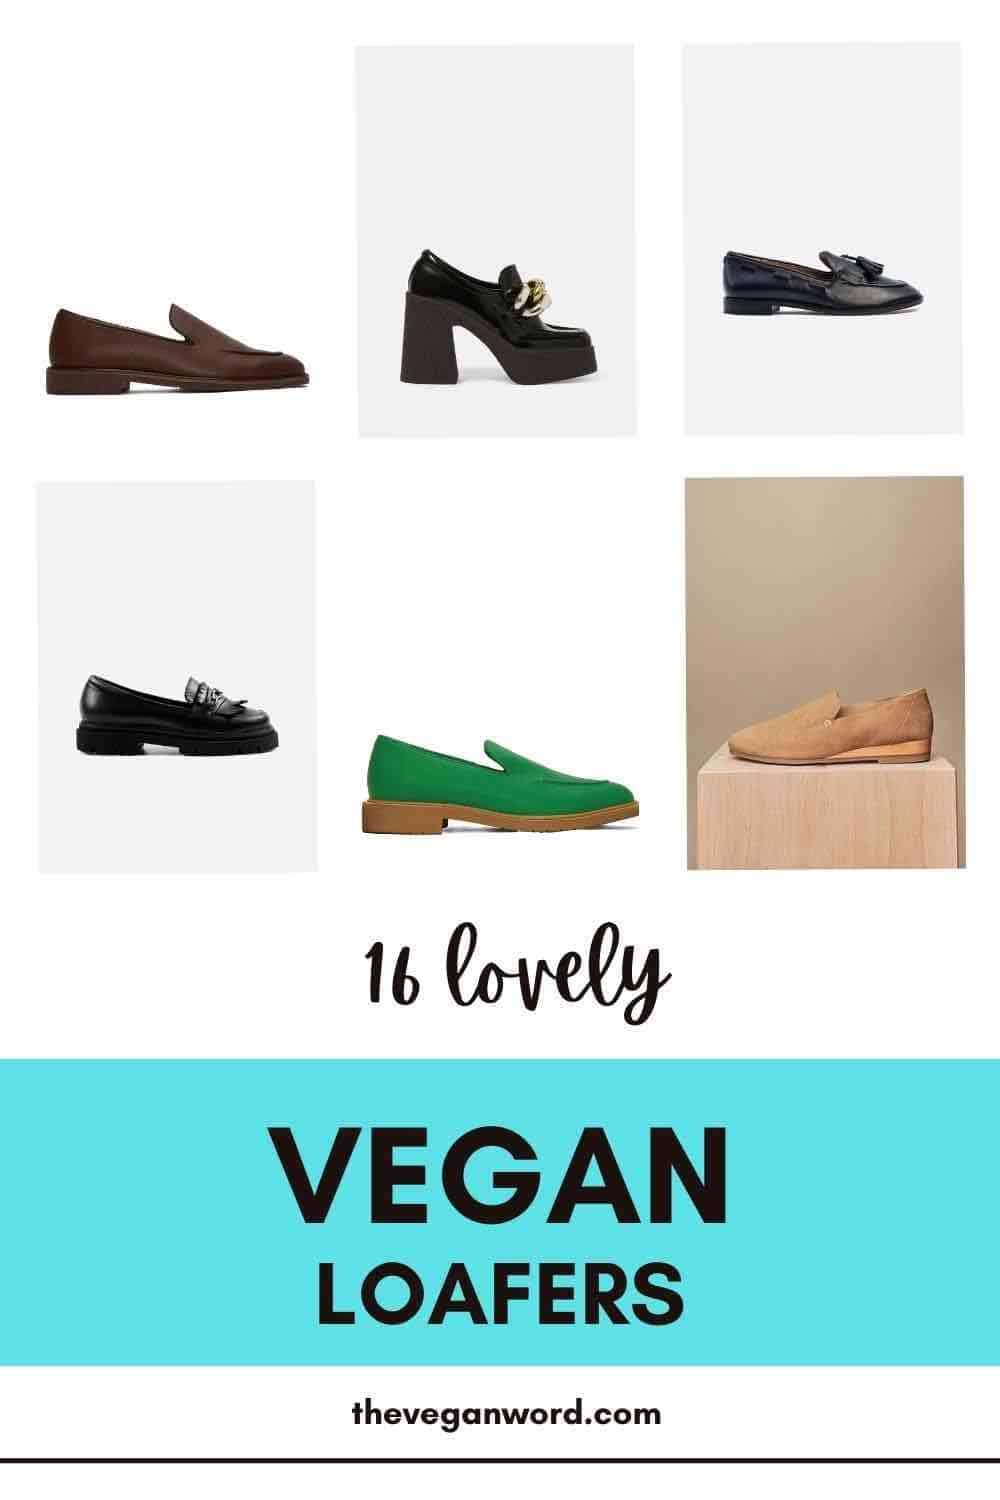 Pinterest image showing vegan loafers and text that reads "16 lovely vegan loafers"